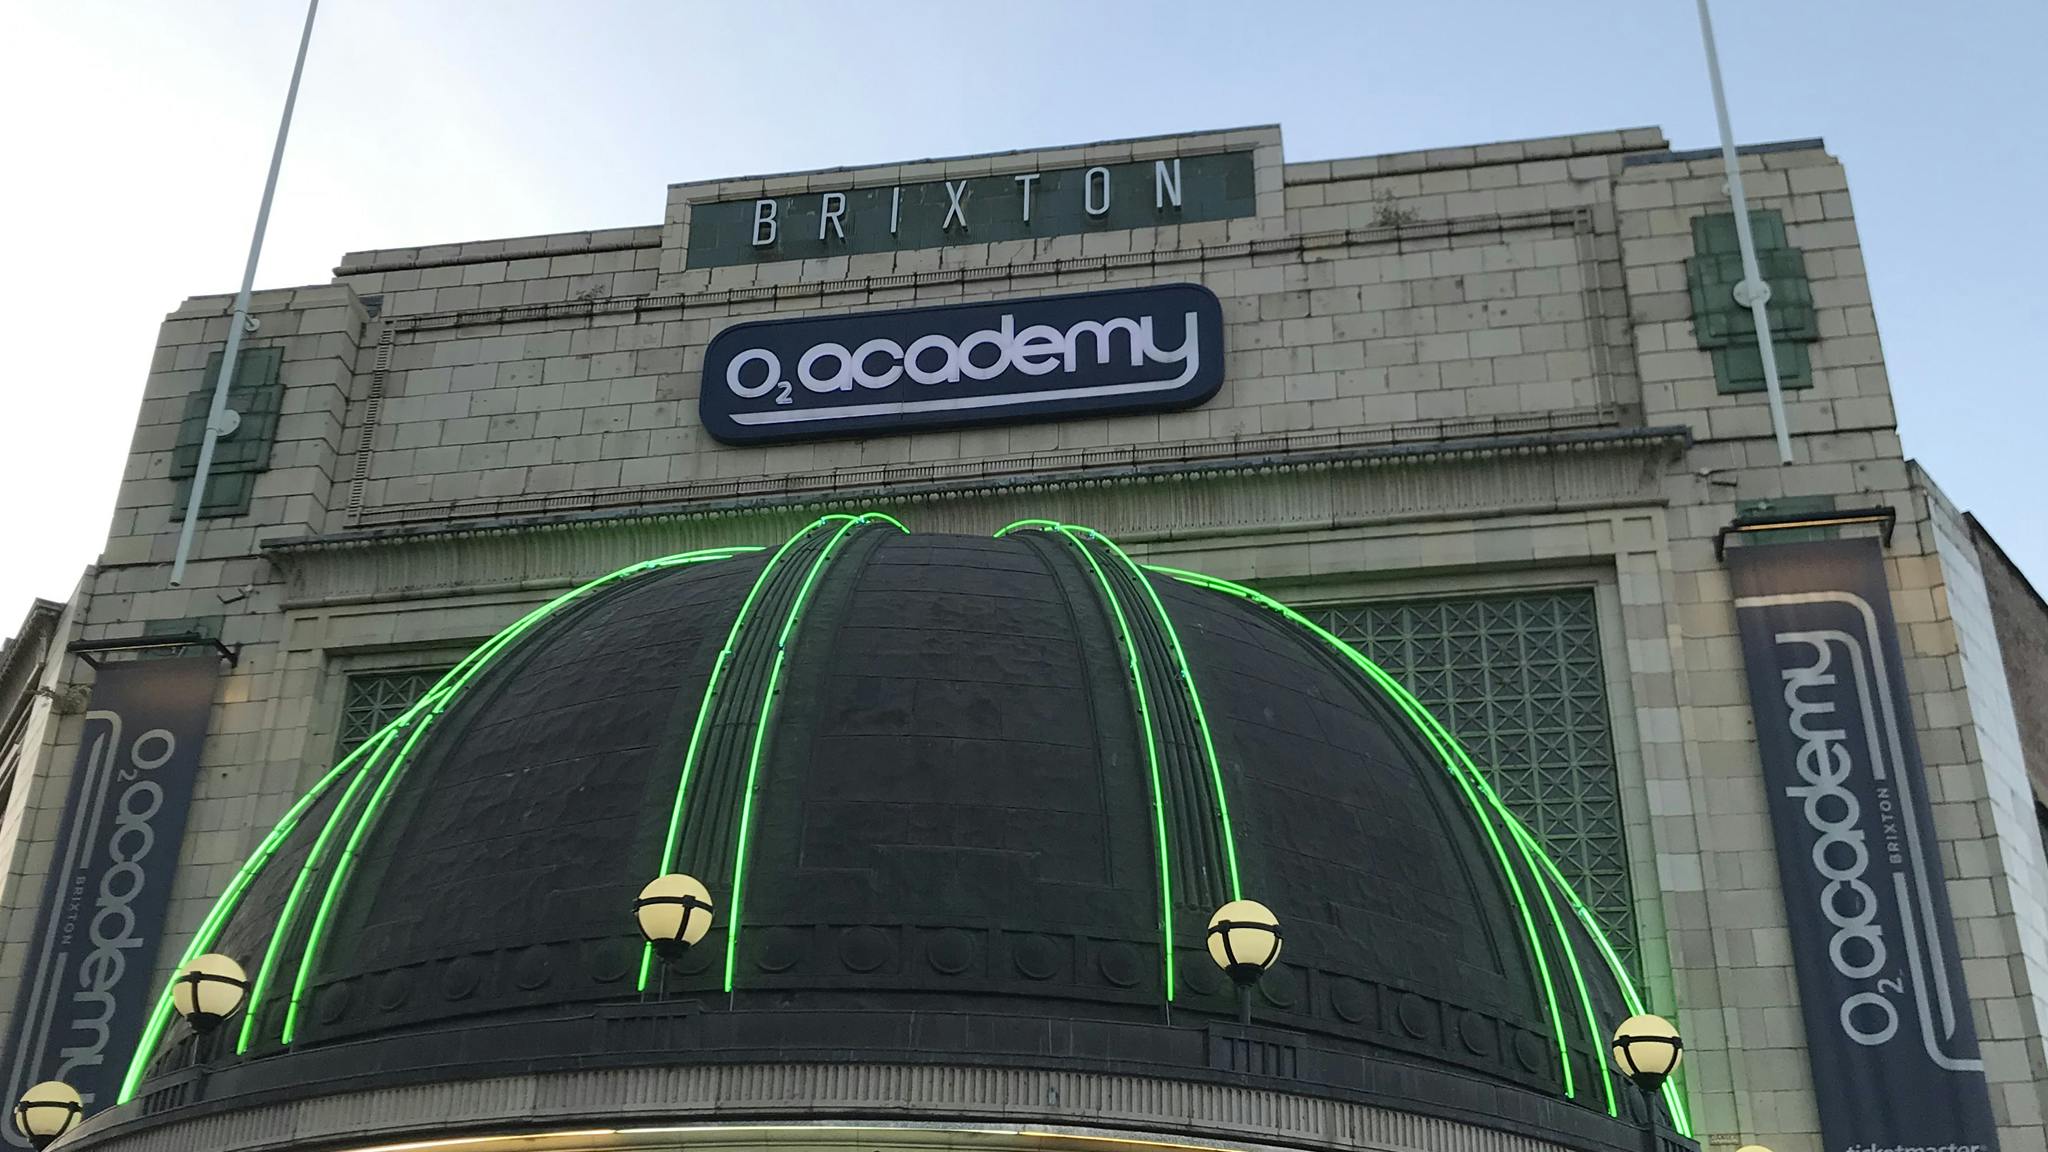 London’s O2 Academy Brixton announces reopening date and first shows